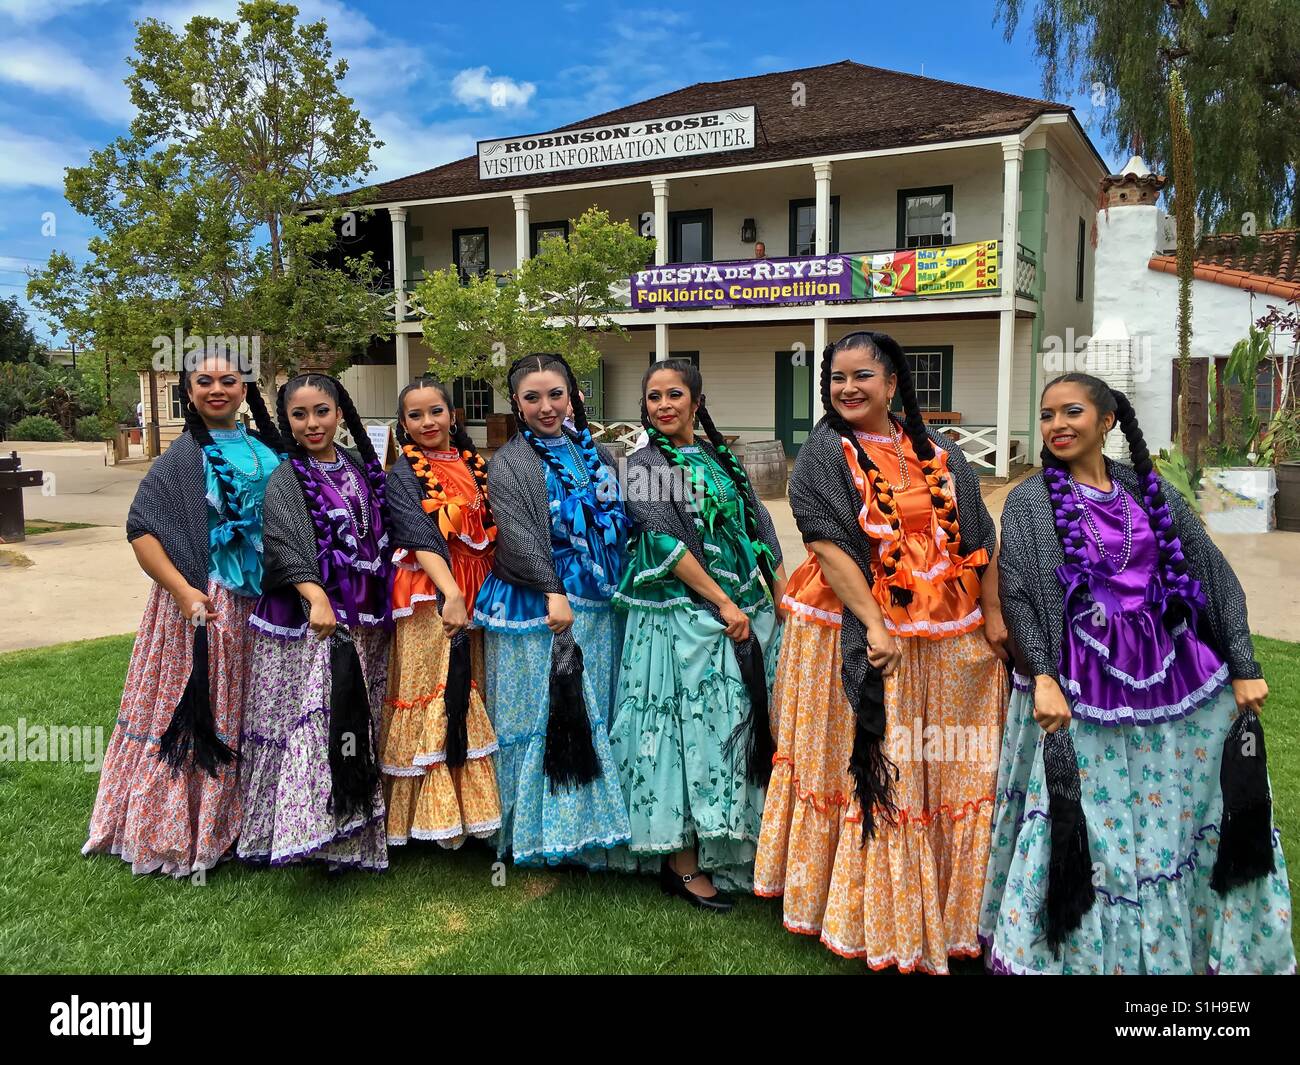 Old Town State Historic Park, San Diego, California, USA - May 7, 2016: Cinco de Mayo Festival dancers displaying their colorful dresses. Stock Photo